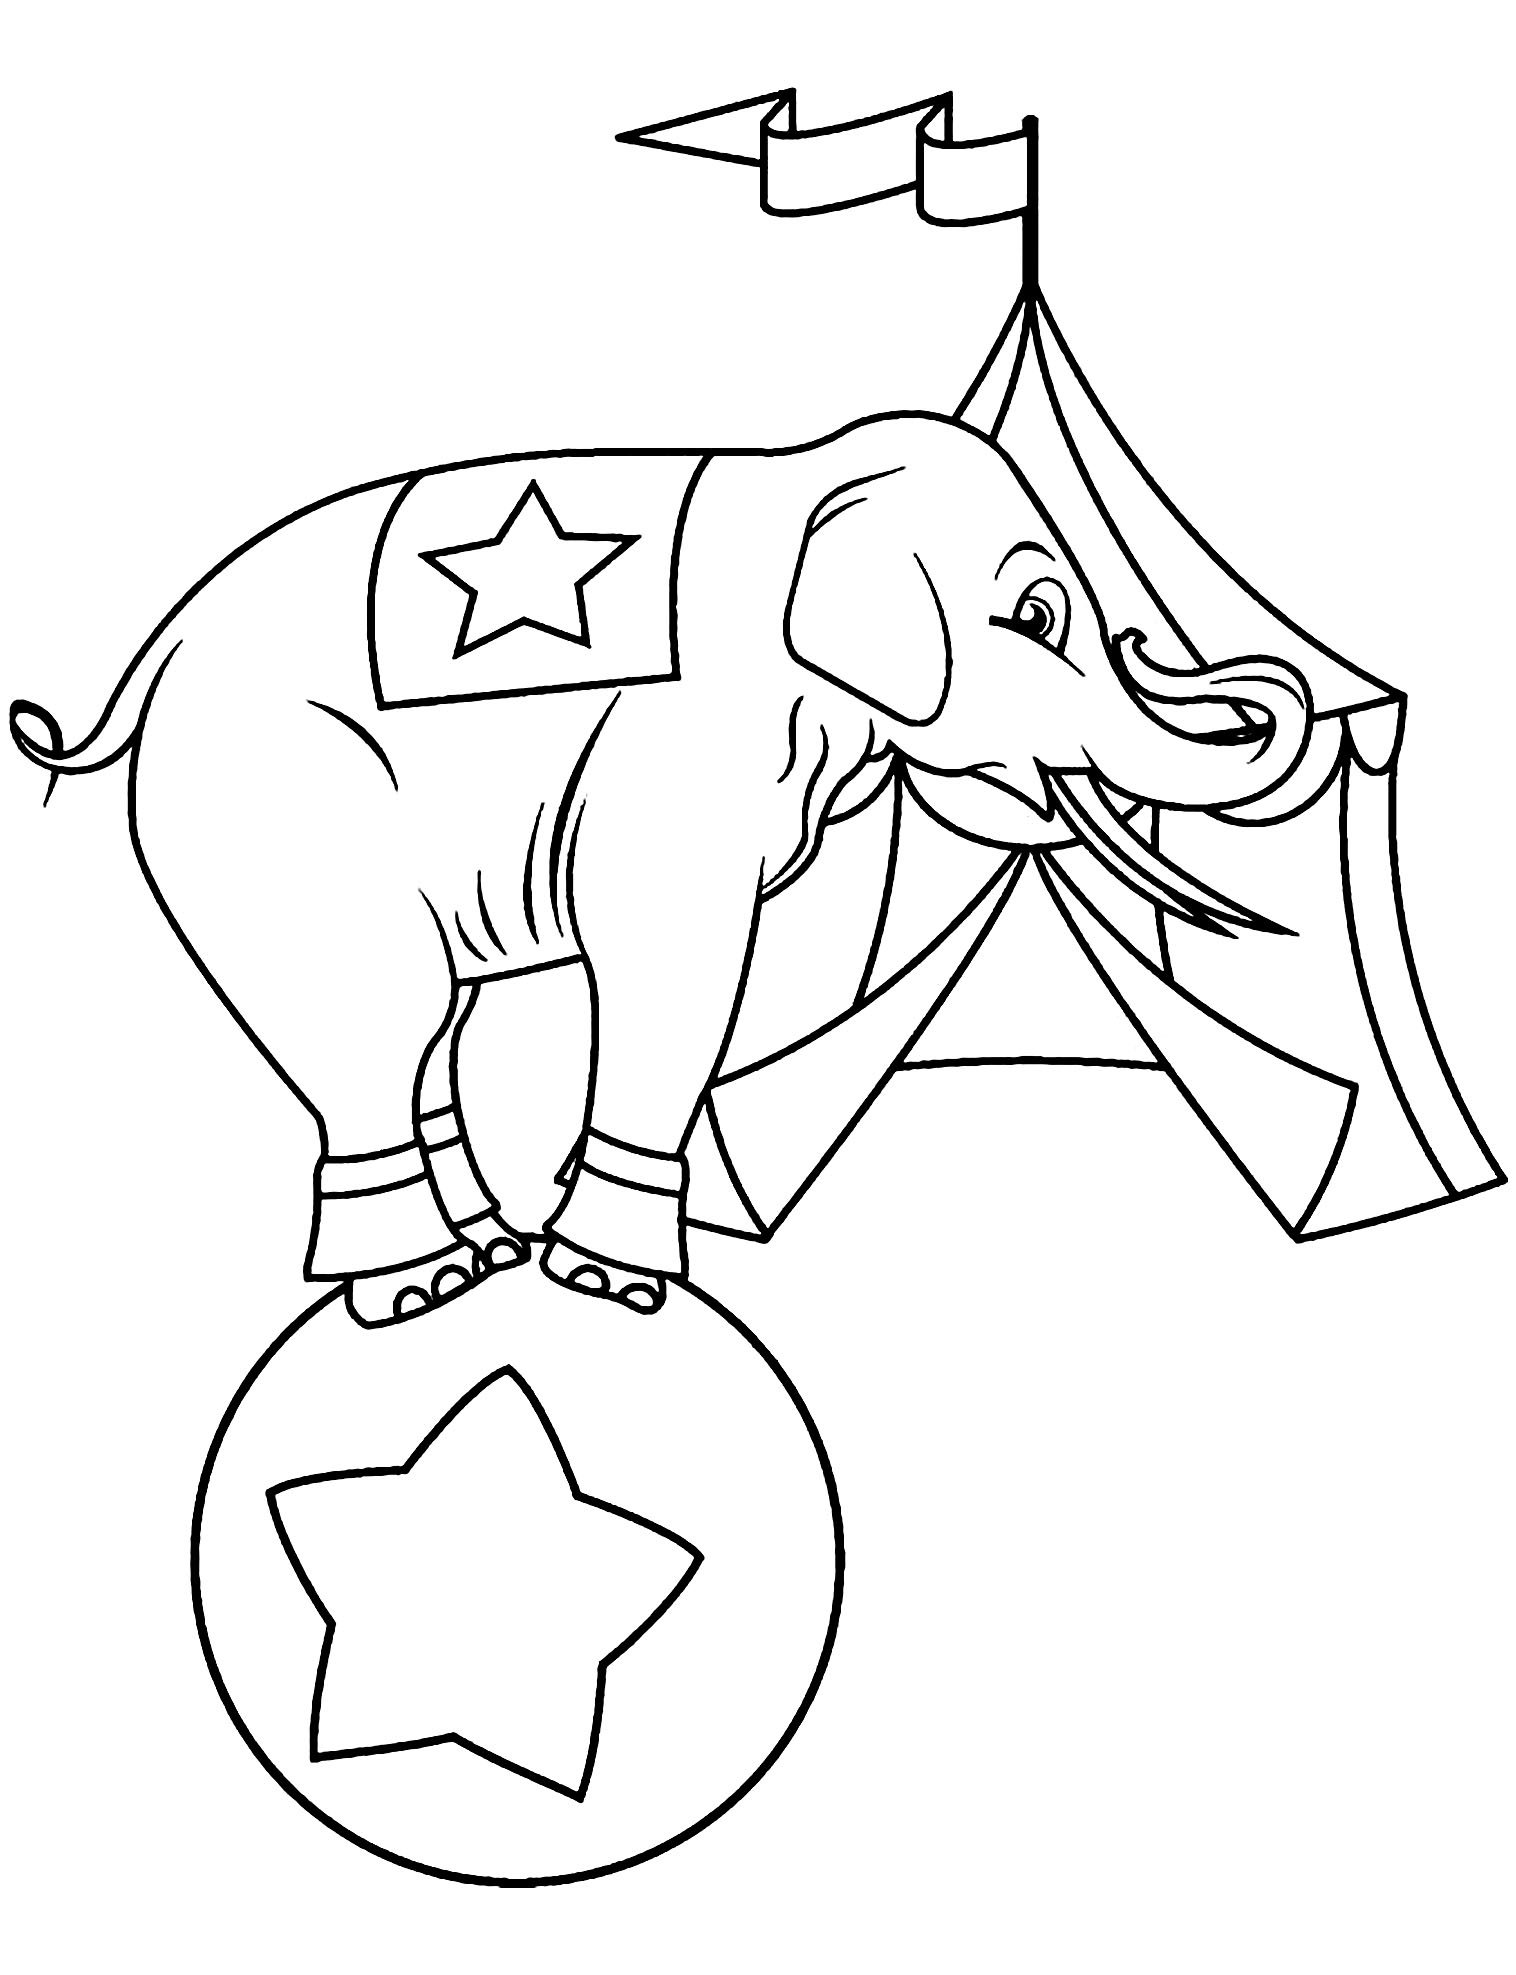 Download Circus for children - Circus Kids Coloring Pages